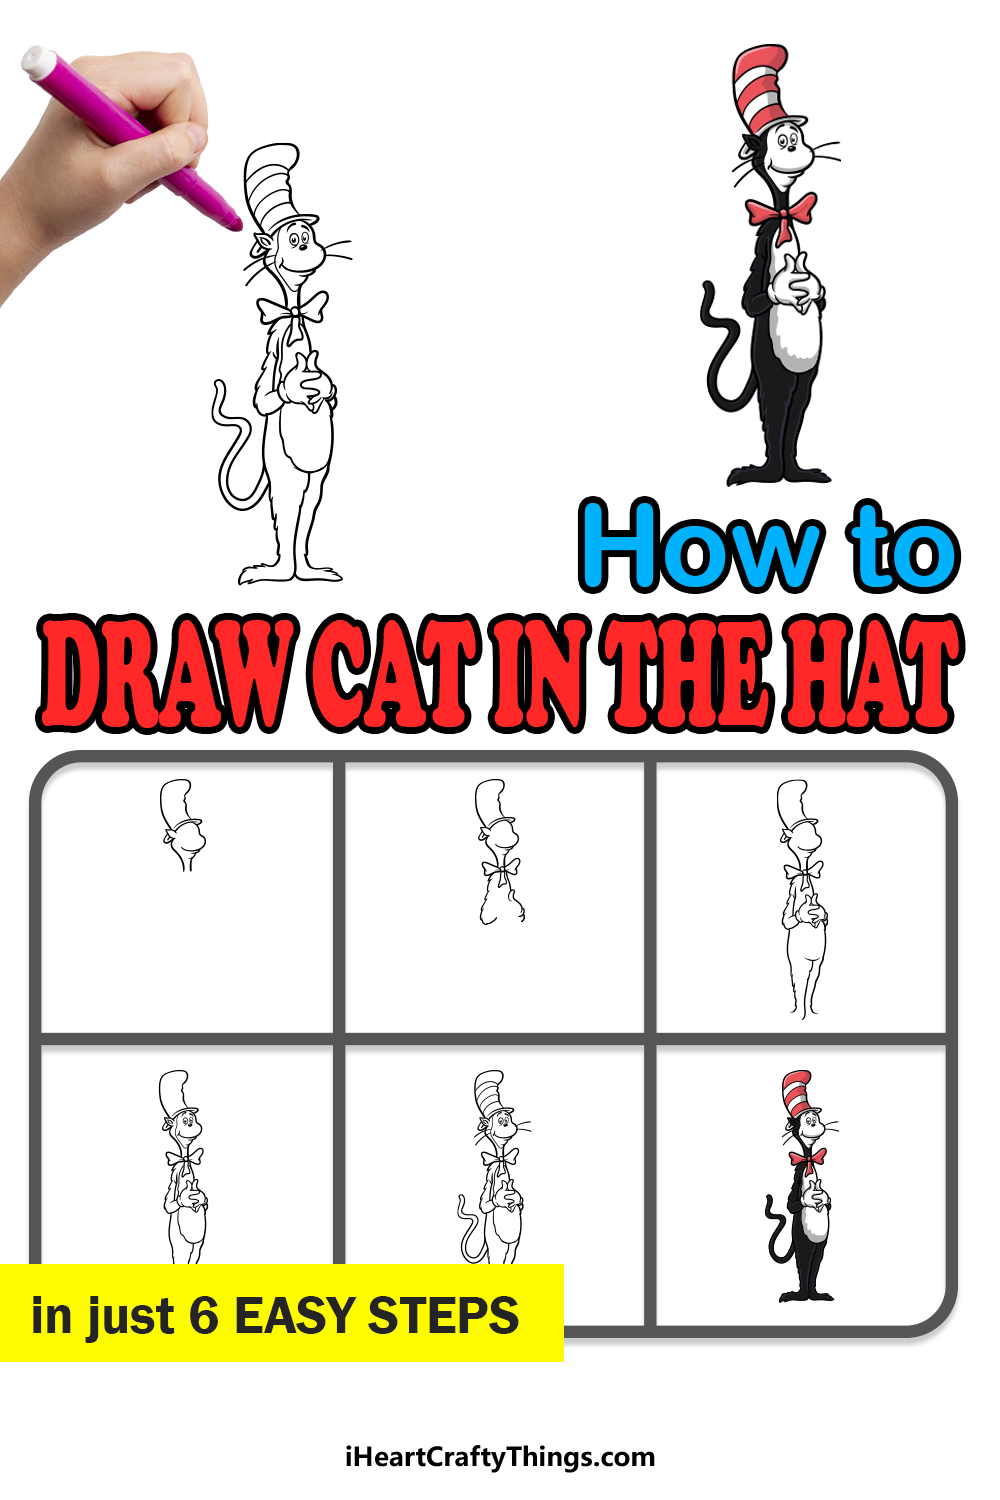 how to draw cat in the hat in 6 easy steps